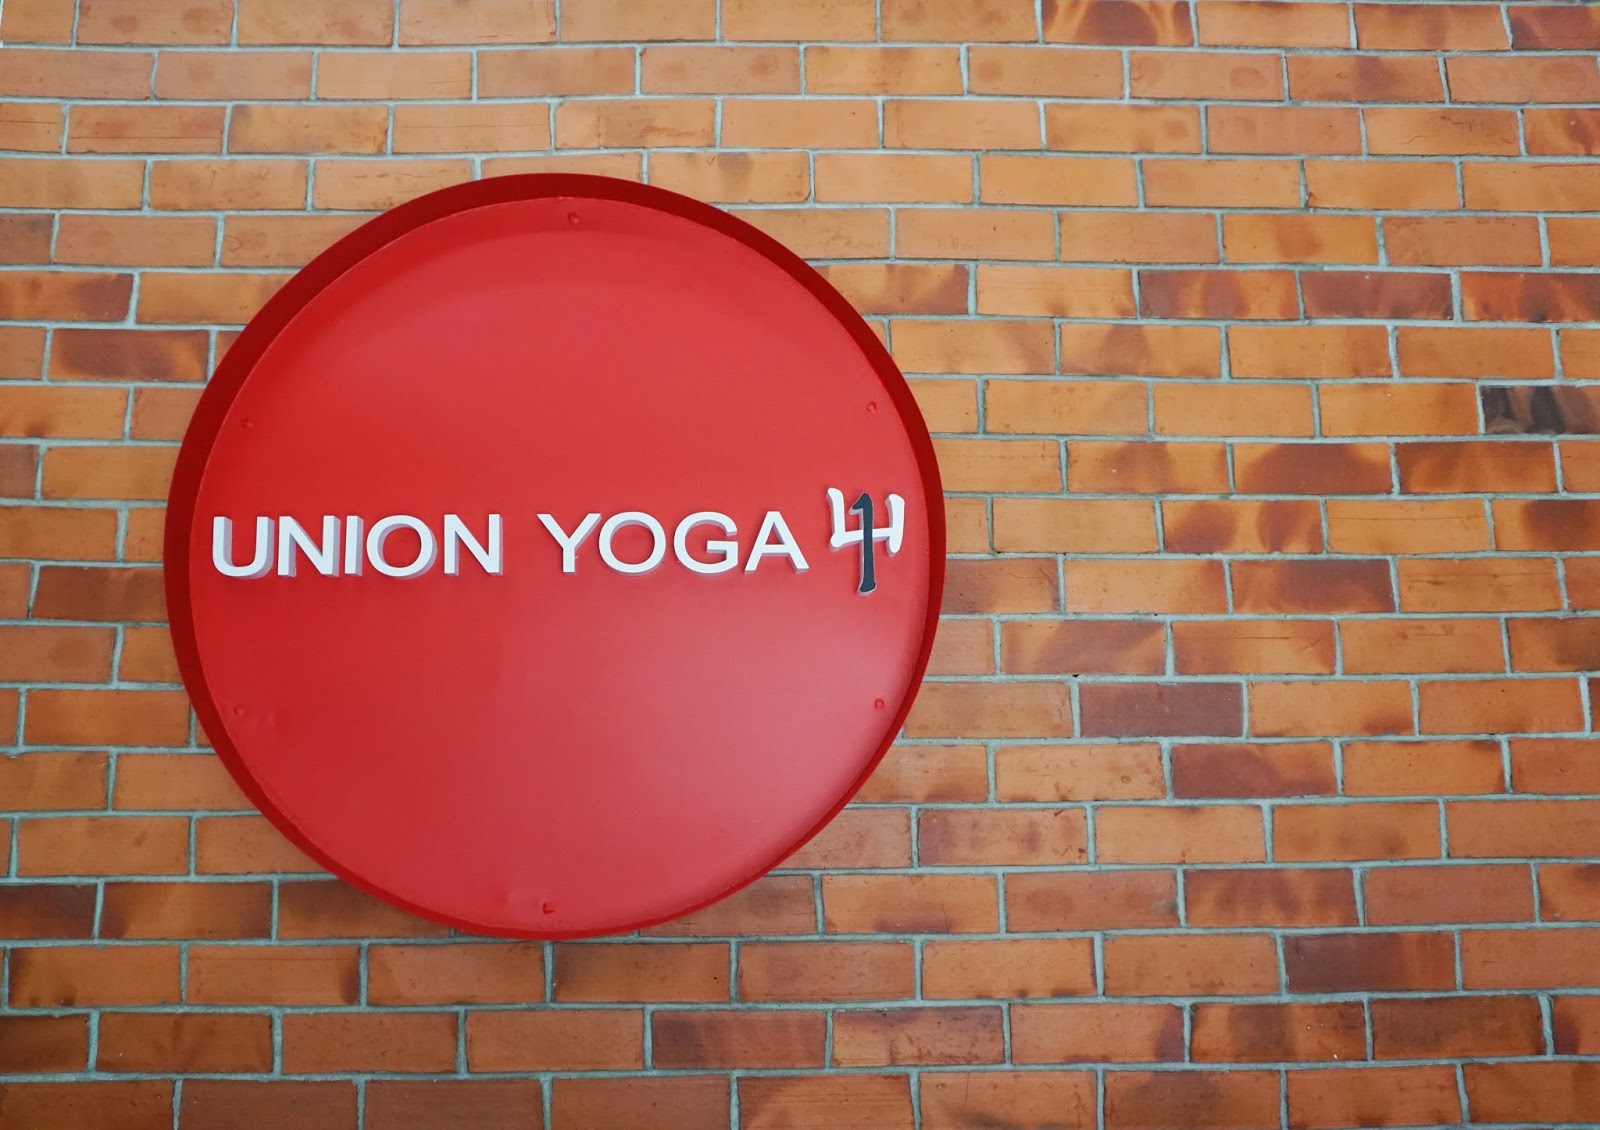 BIKRAM YOGA JAKARTA - All You Need to Know BEFORE You Go (with Photos)